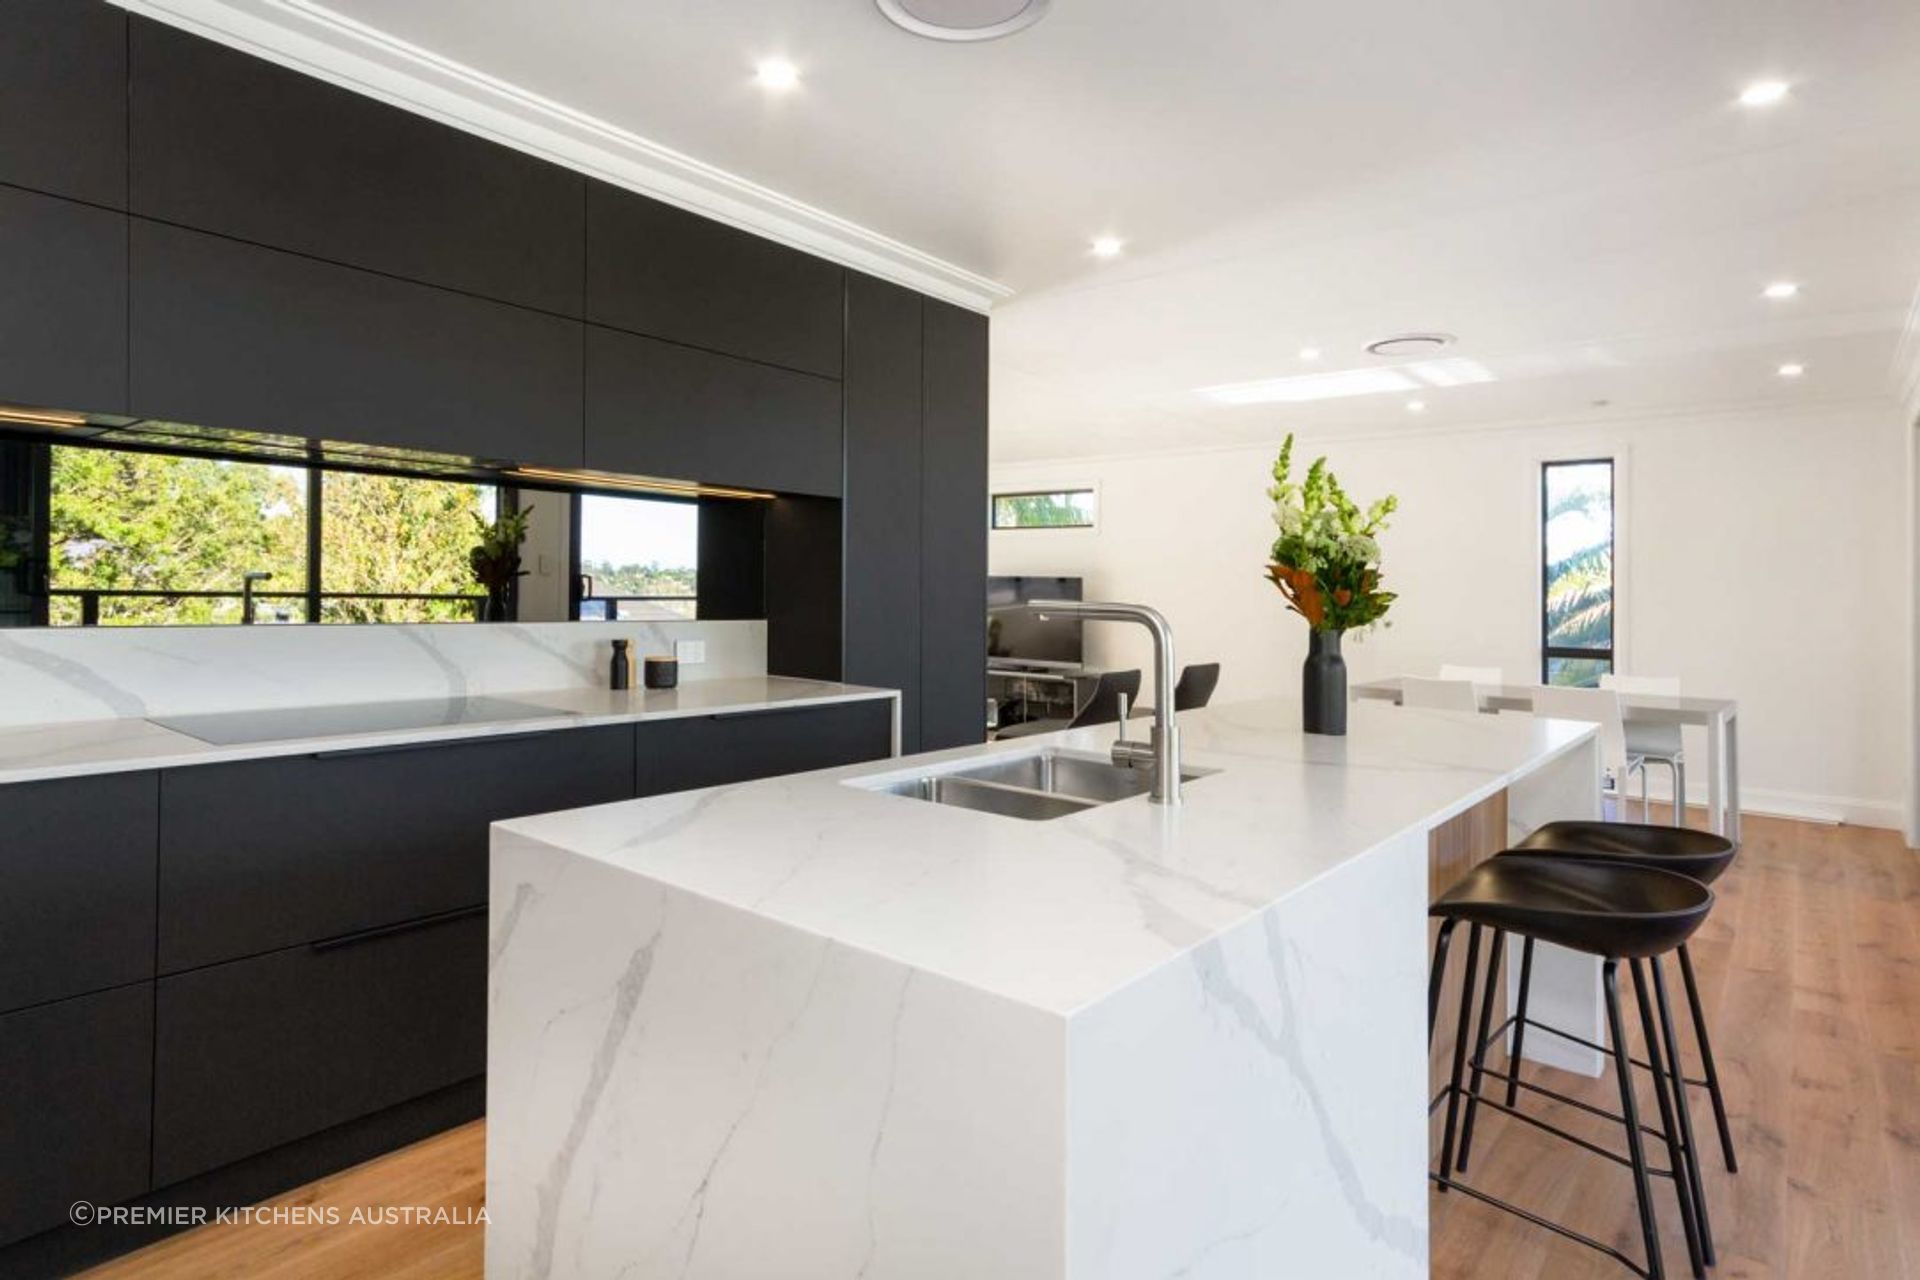 kitchen-design-sydney-contemporary-black-white-timber-miele-fisher-paykel-dulux-5-1084x723.jpg